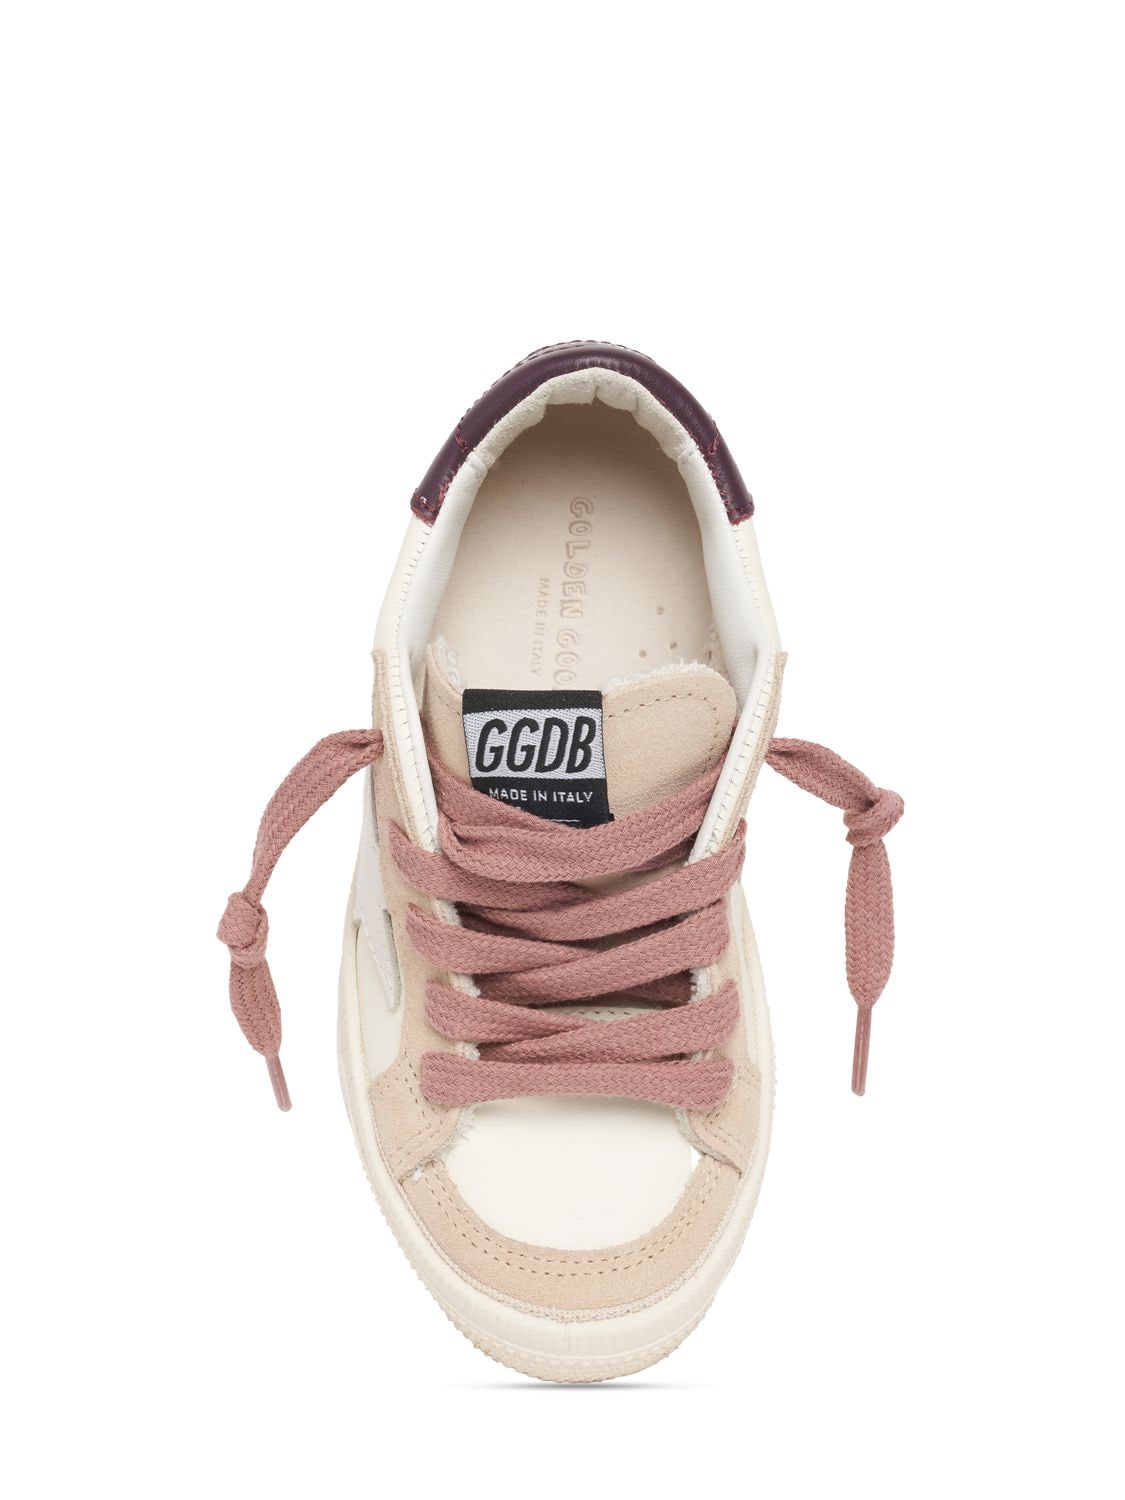 Shop Golden Goose May Leather Lace-up Sneakers In White,nude